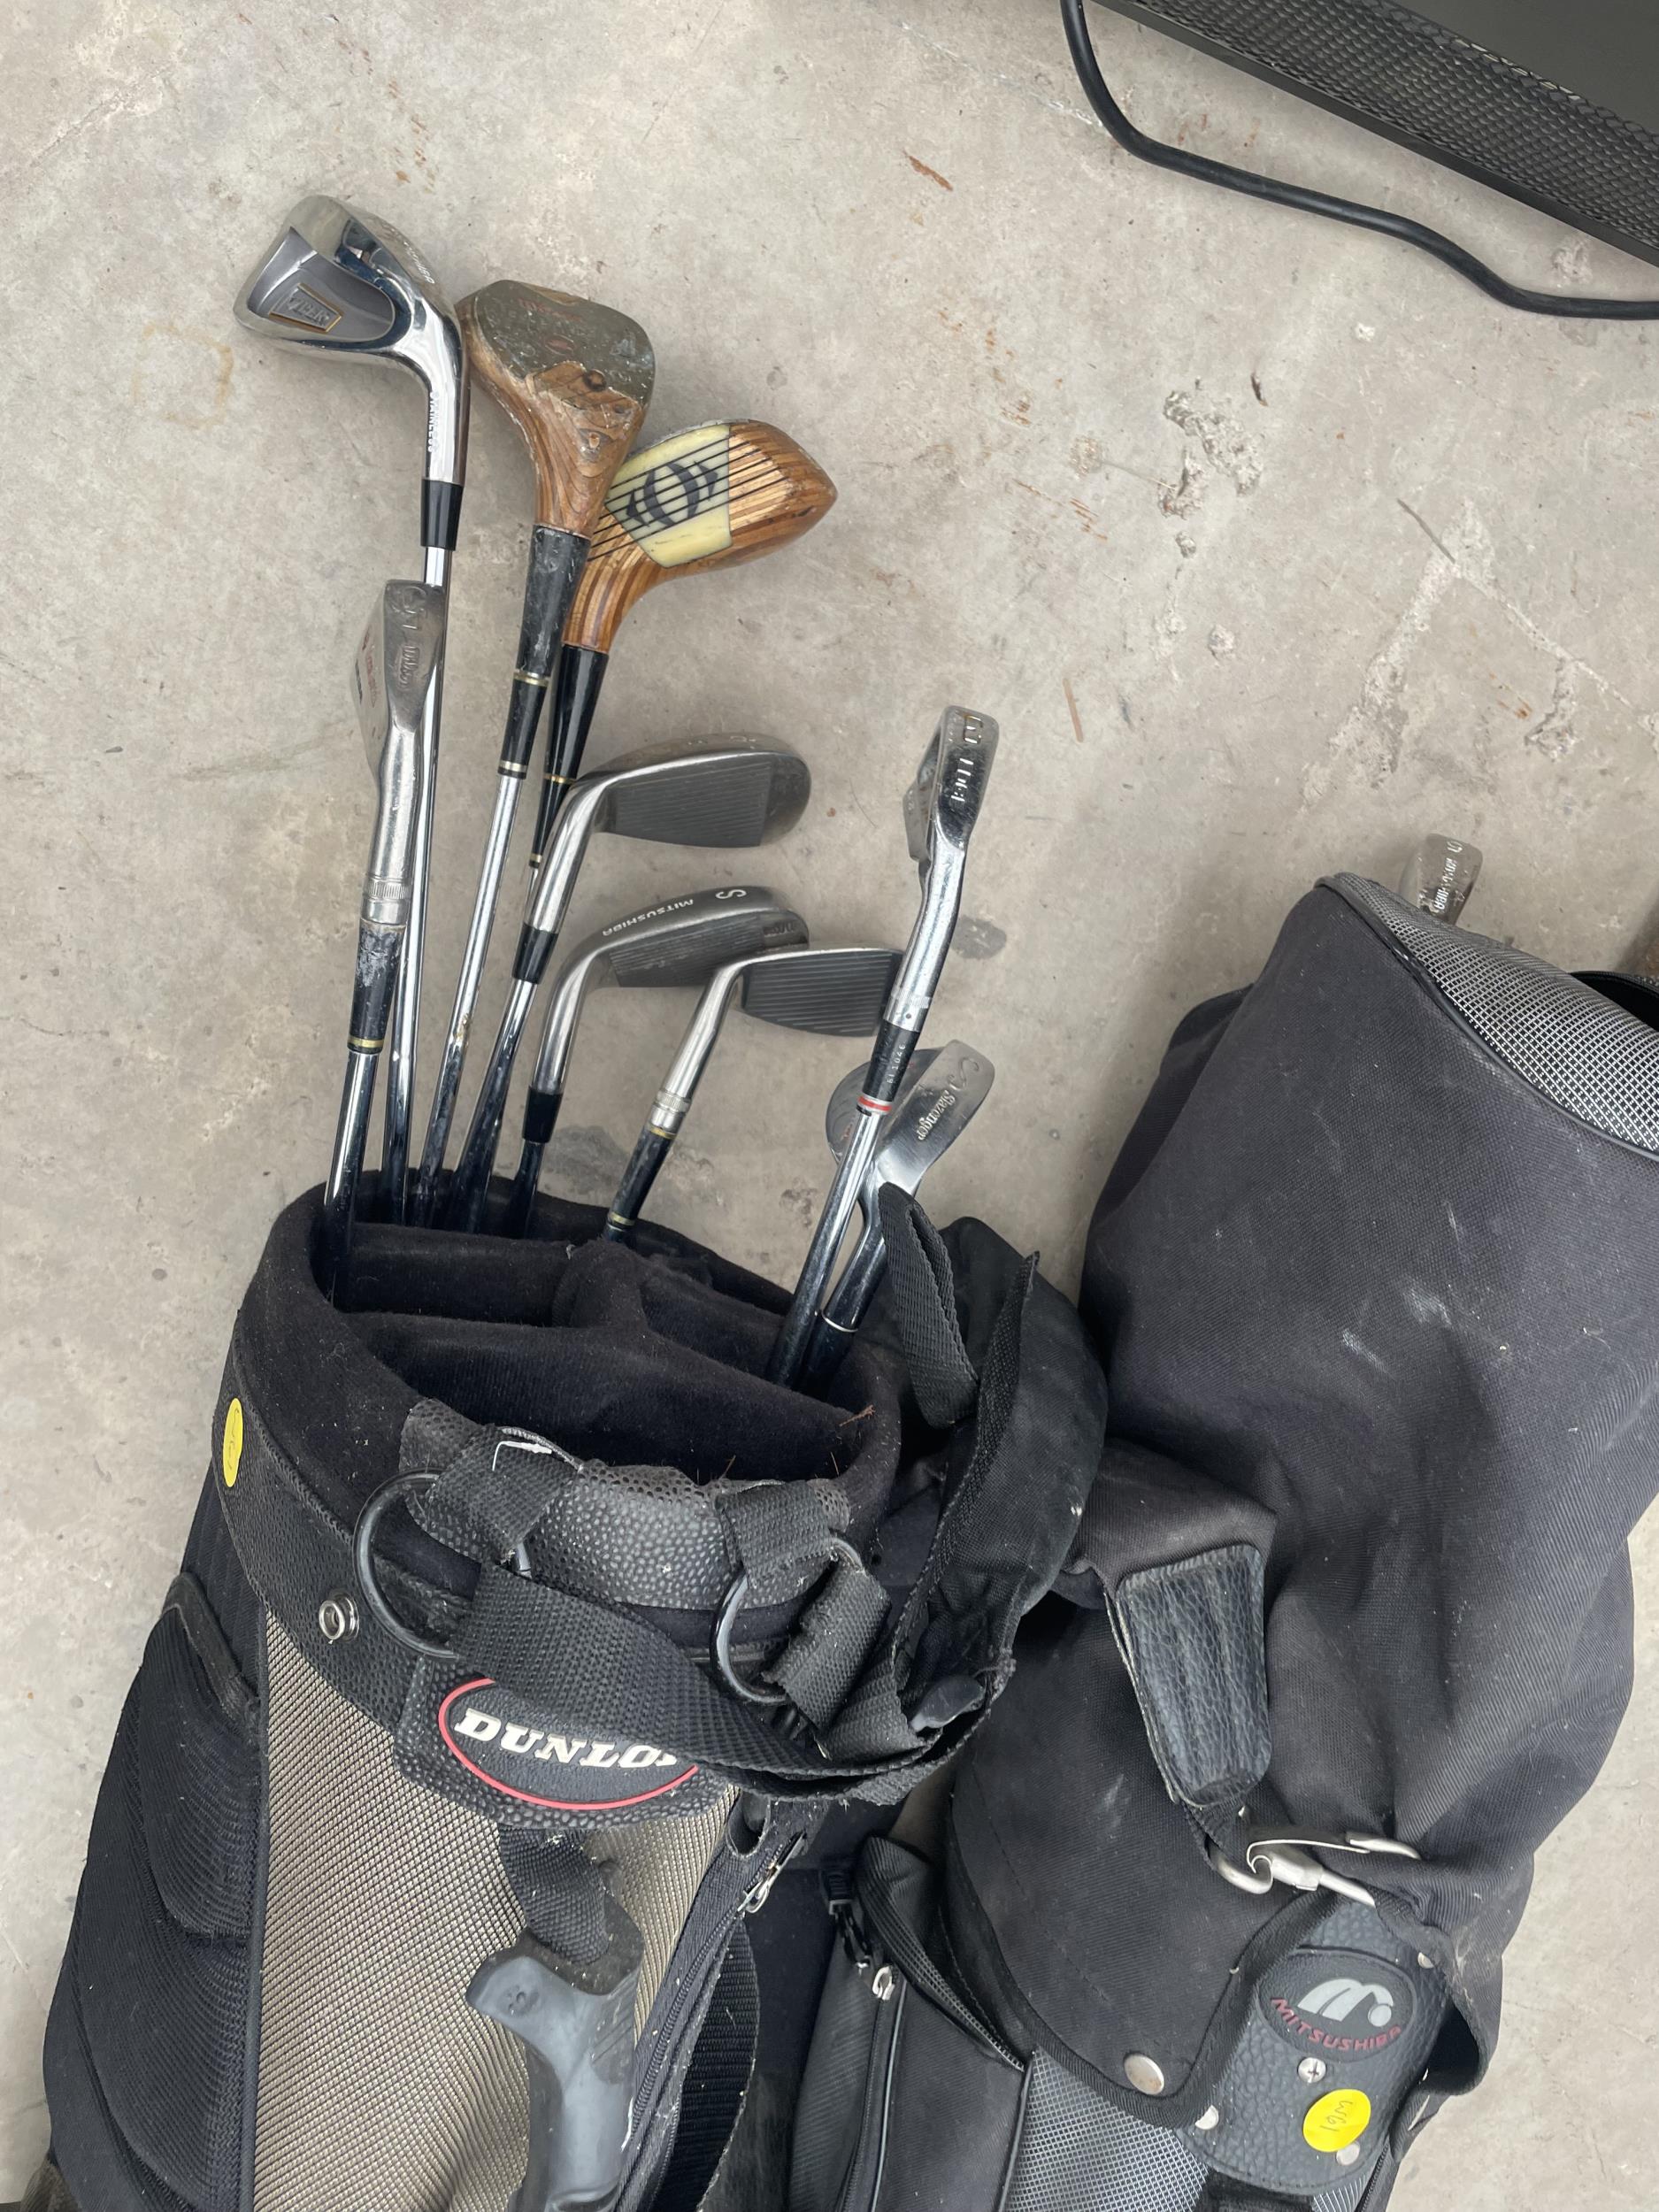 TWO GOLF BAGS WITH AN ASSORTMENT OF GOLF CLUBS AND AN EXERCISE MACHINE - Image 2 of 4